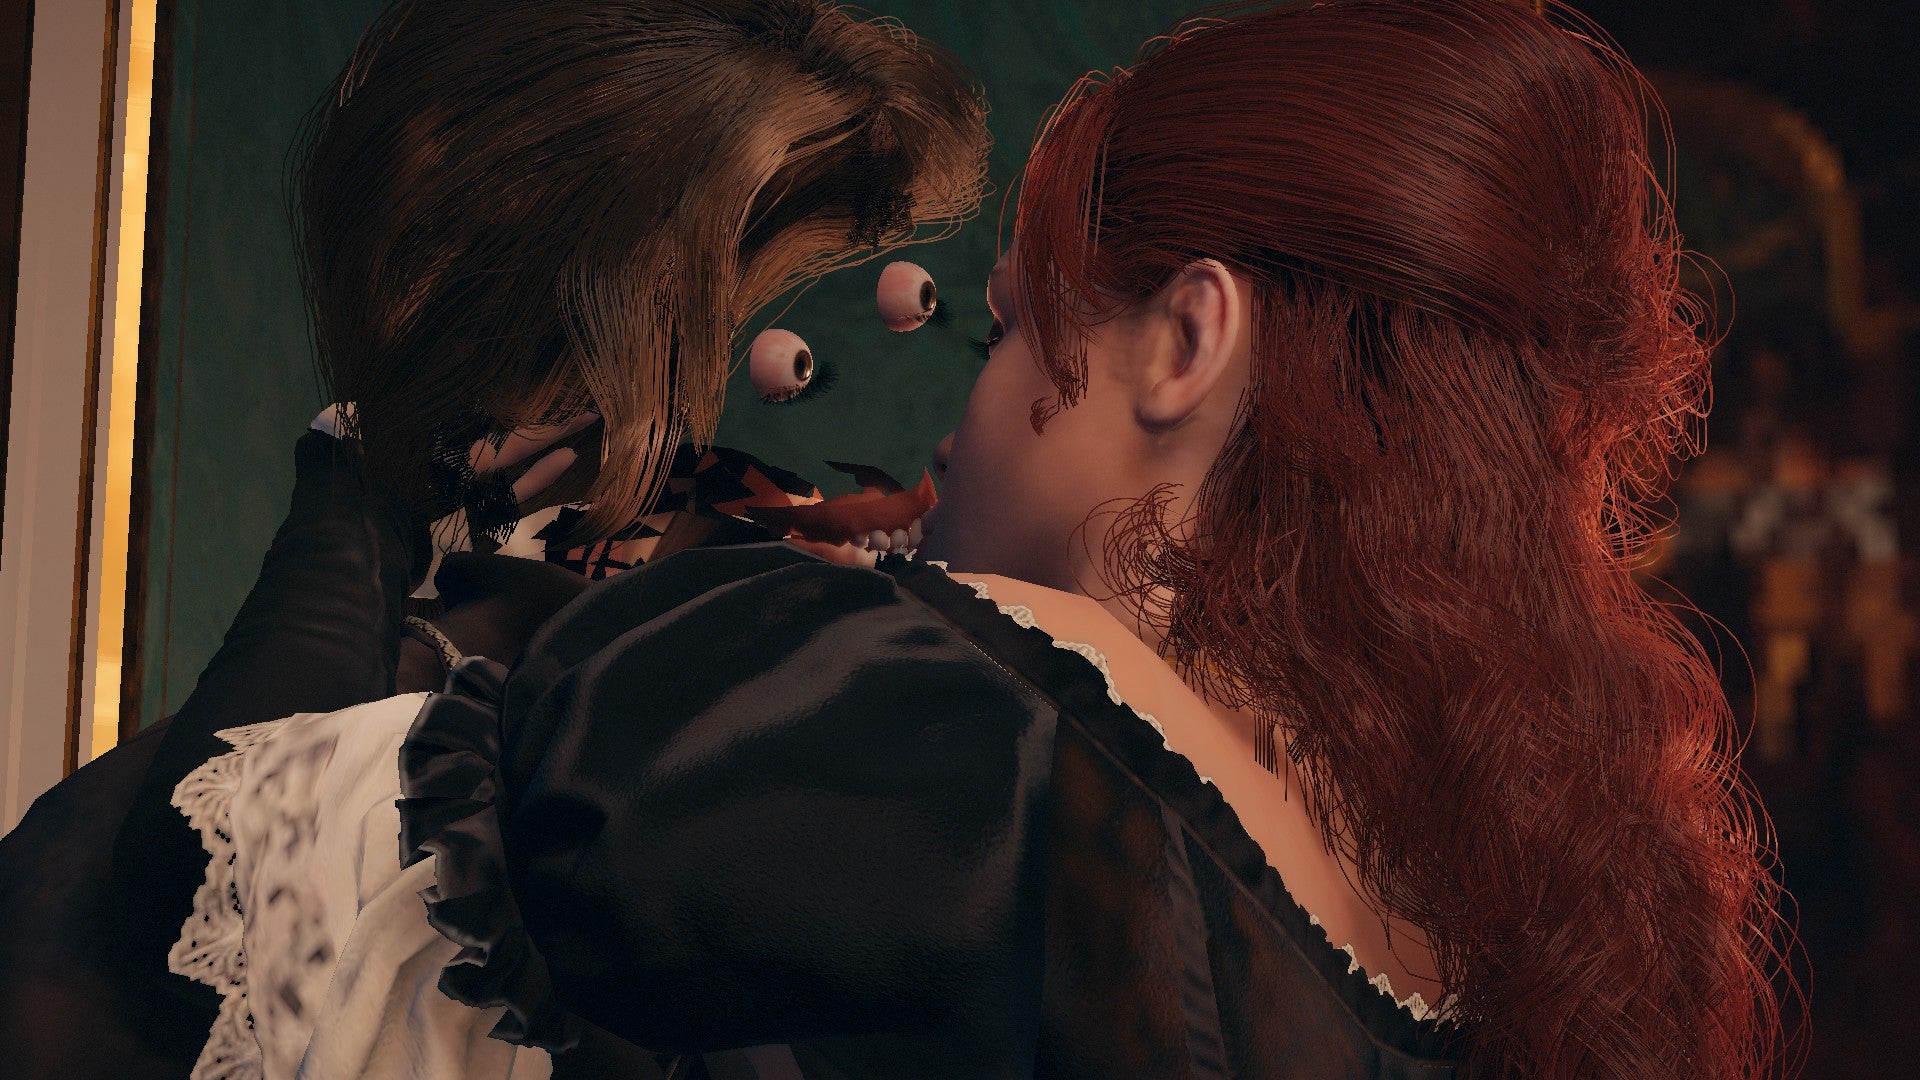 Assassin's Creed Unity Has The Best Glitches